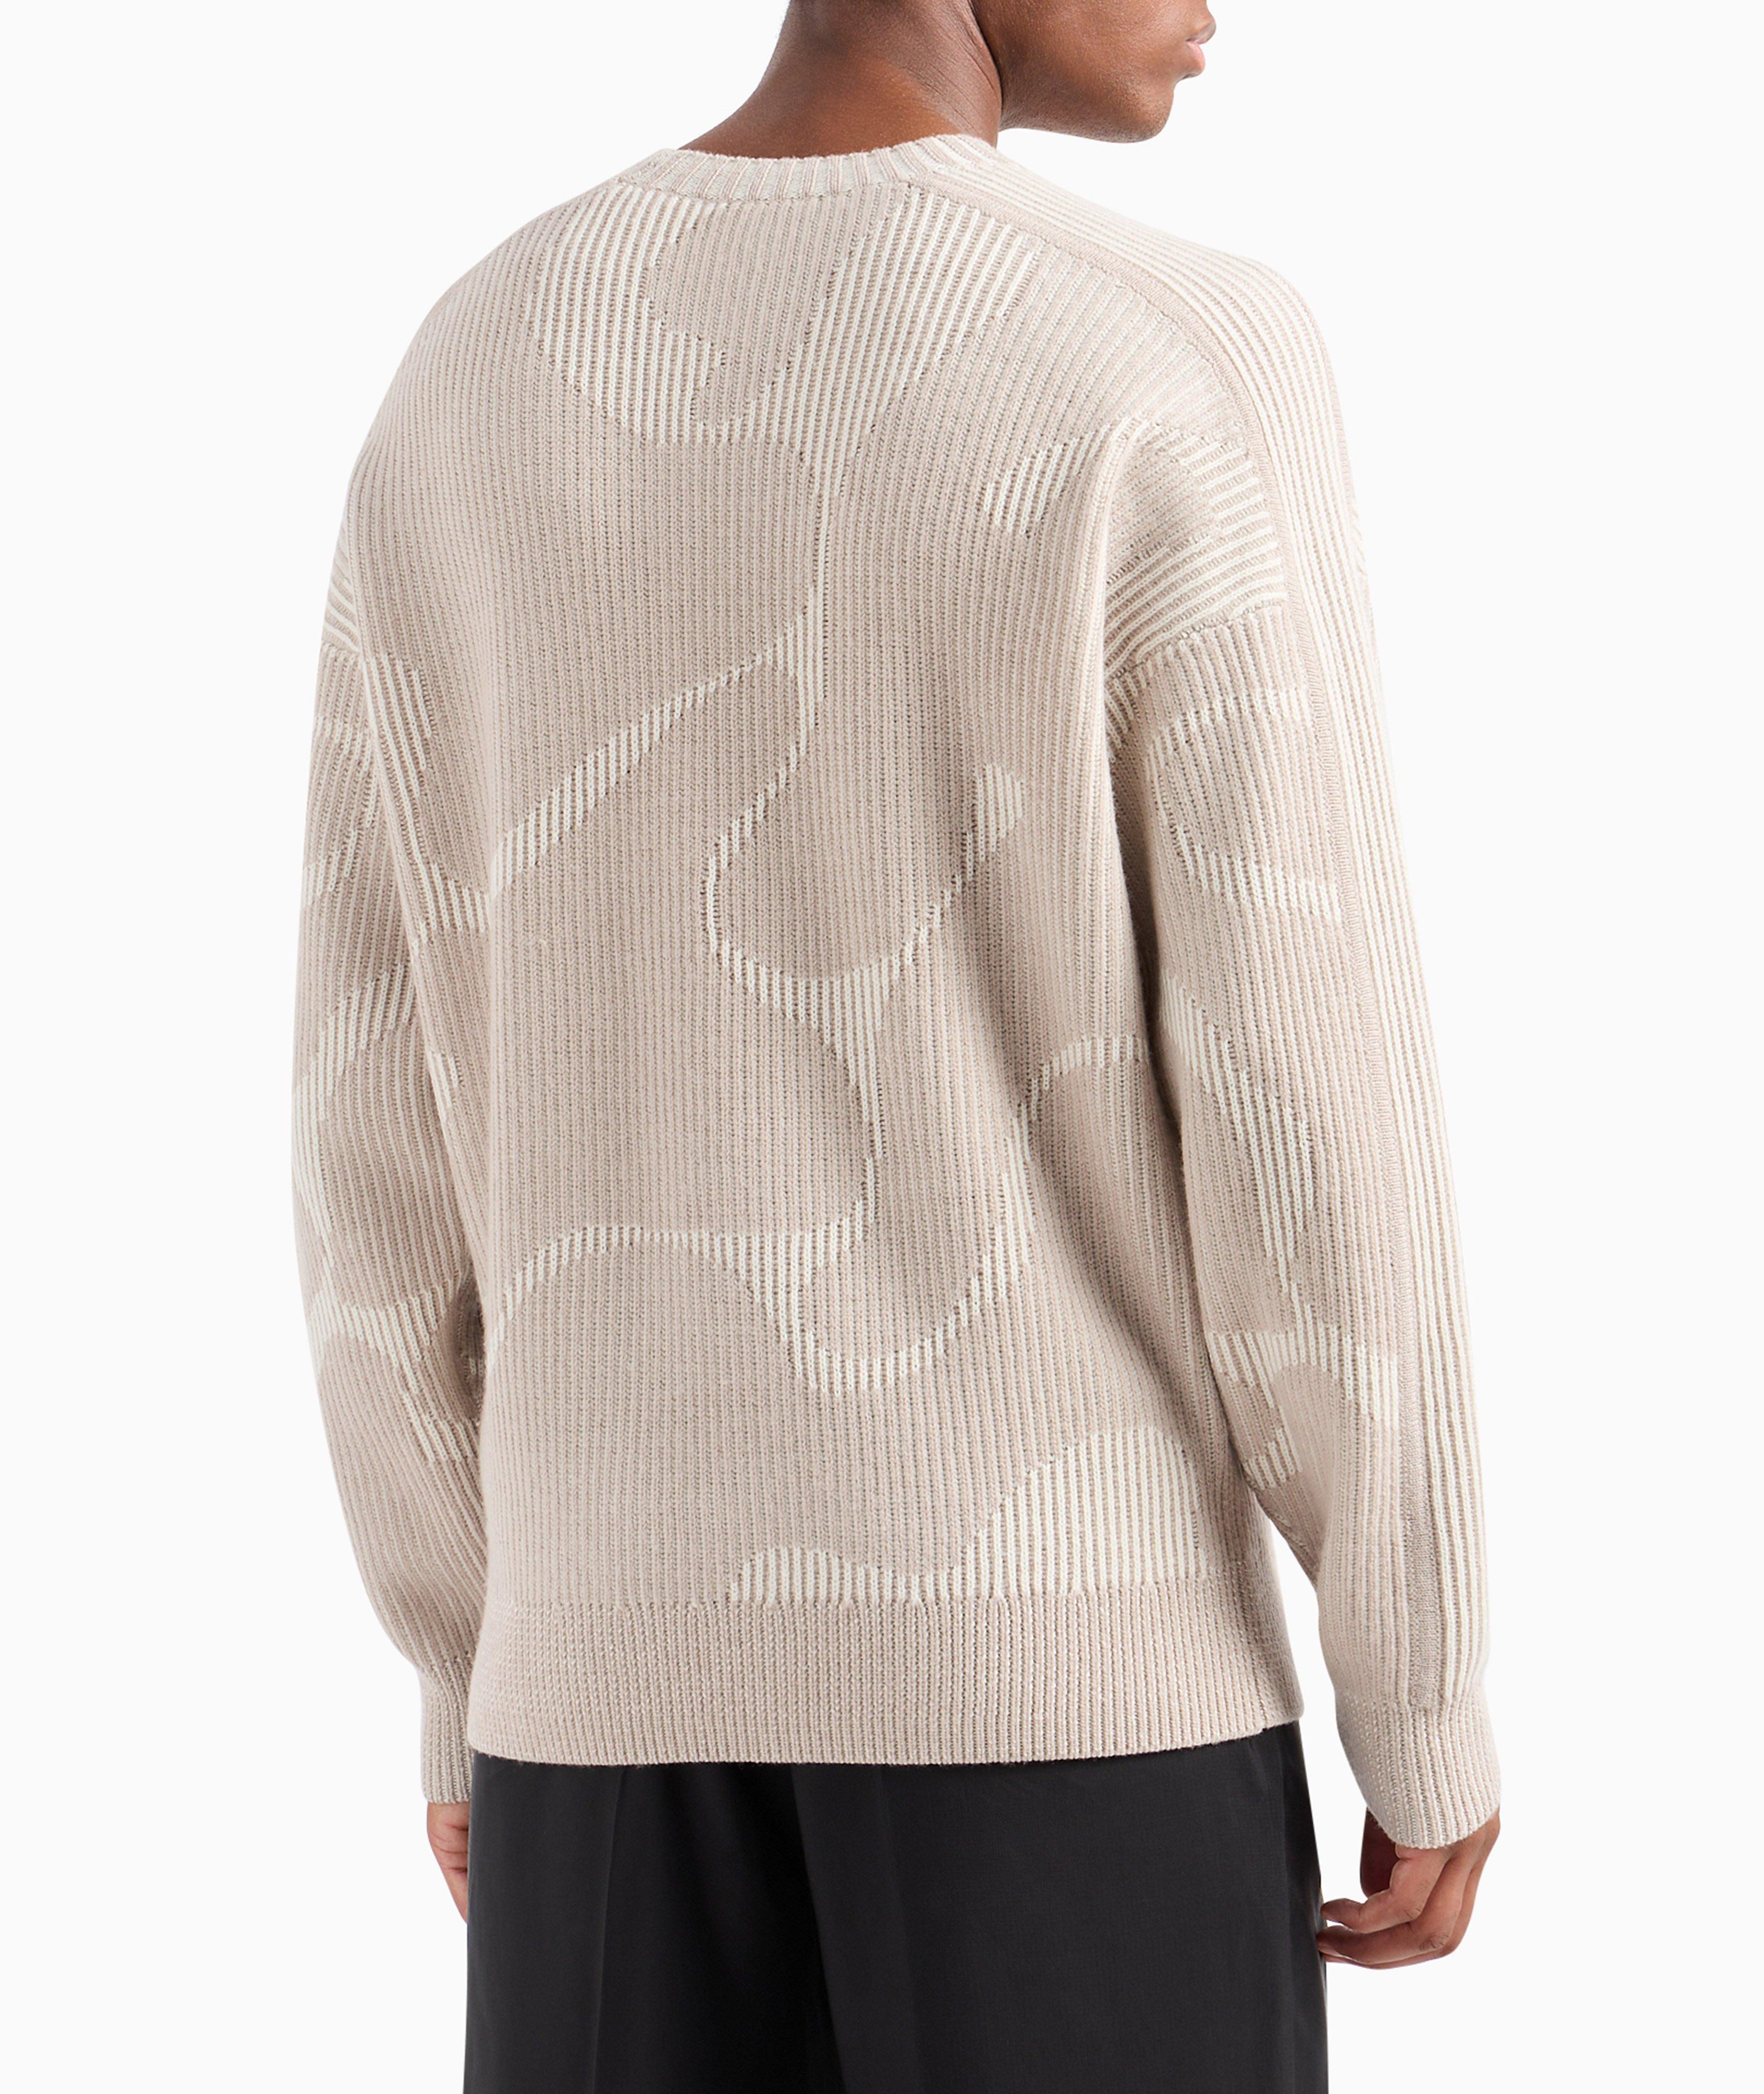 Abstract Jaquared Pattern Ribbed Knit Sweater  image 2